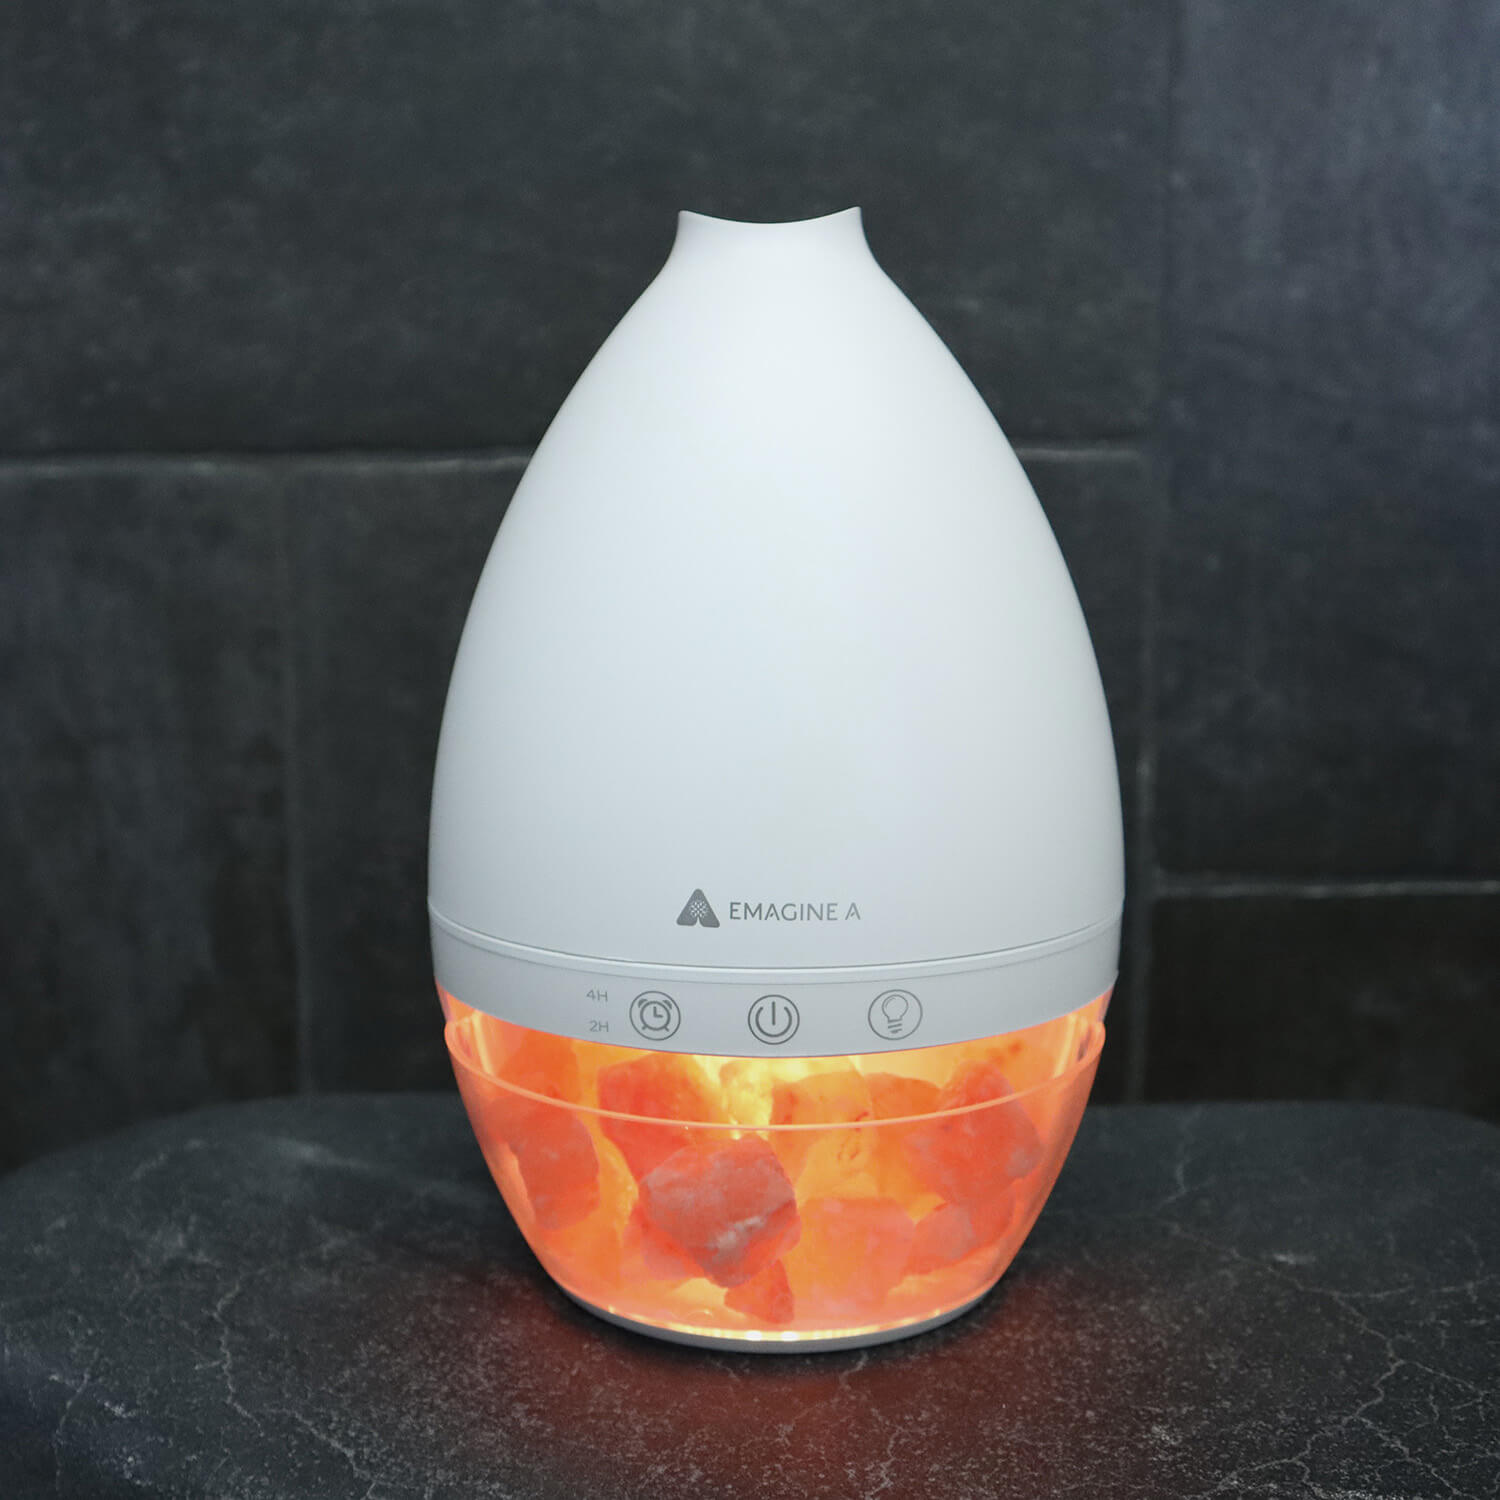 emagine A Himalayan salt lamp diffuser best relaxation gift